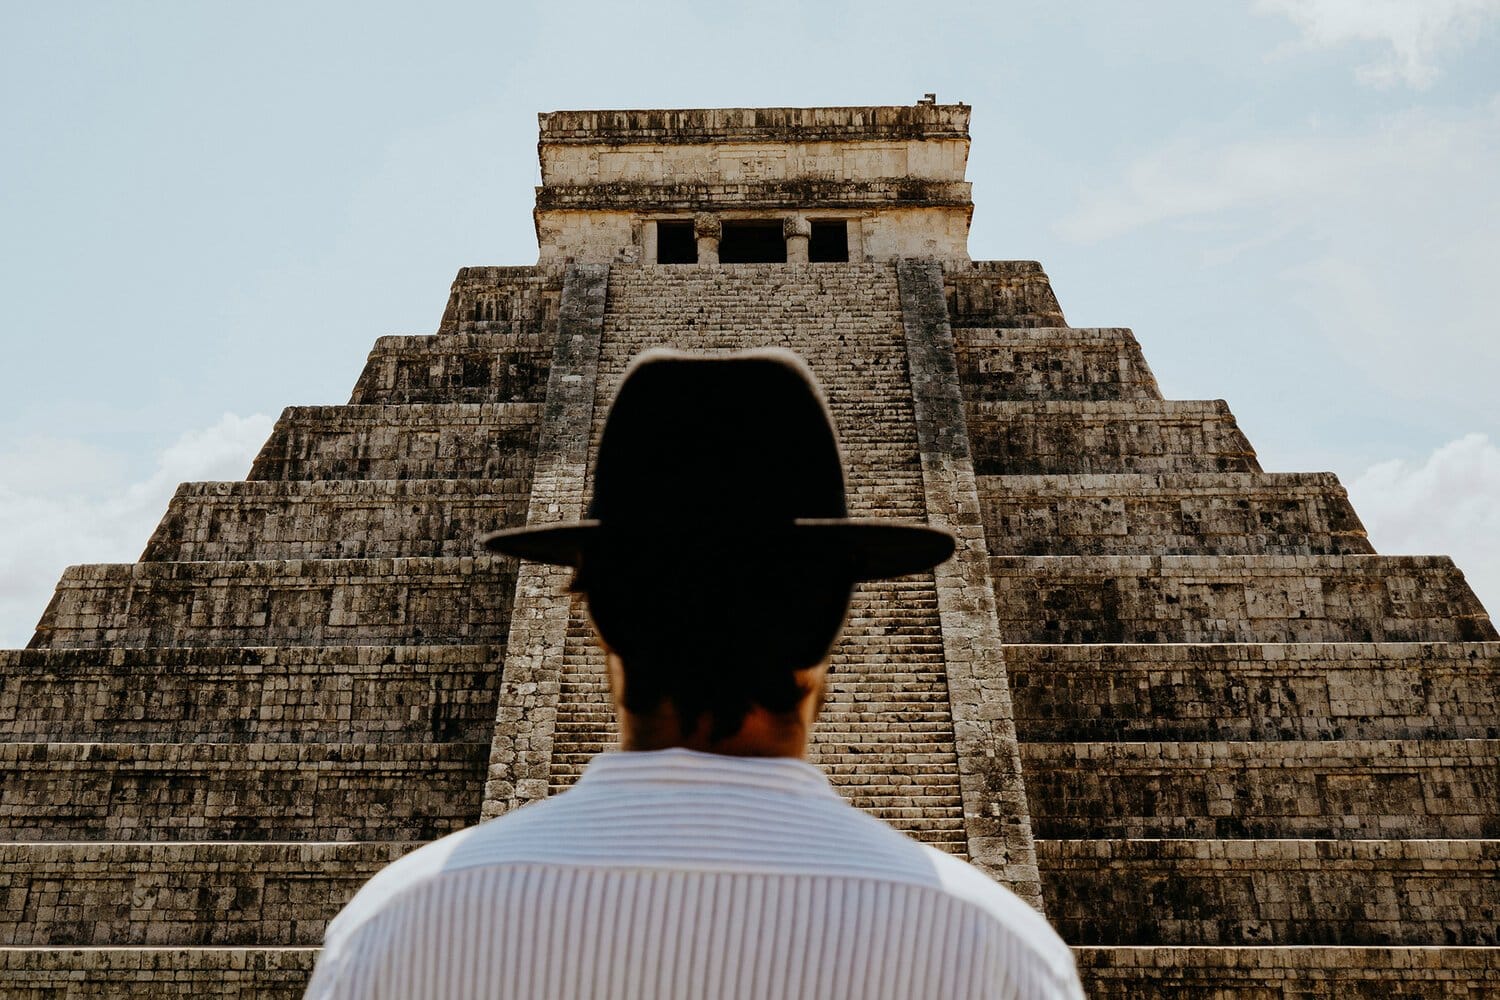 A travellers guide to Chichen Itza